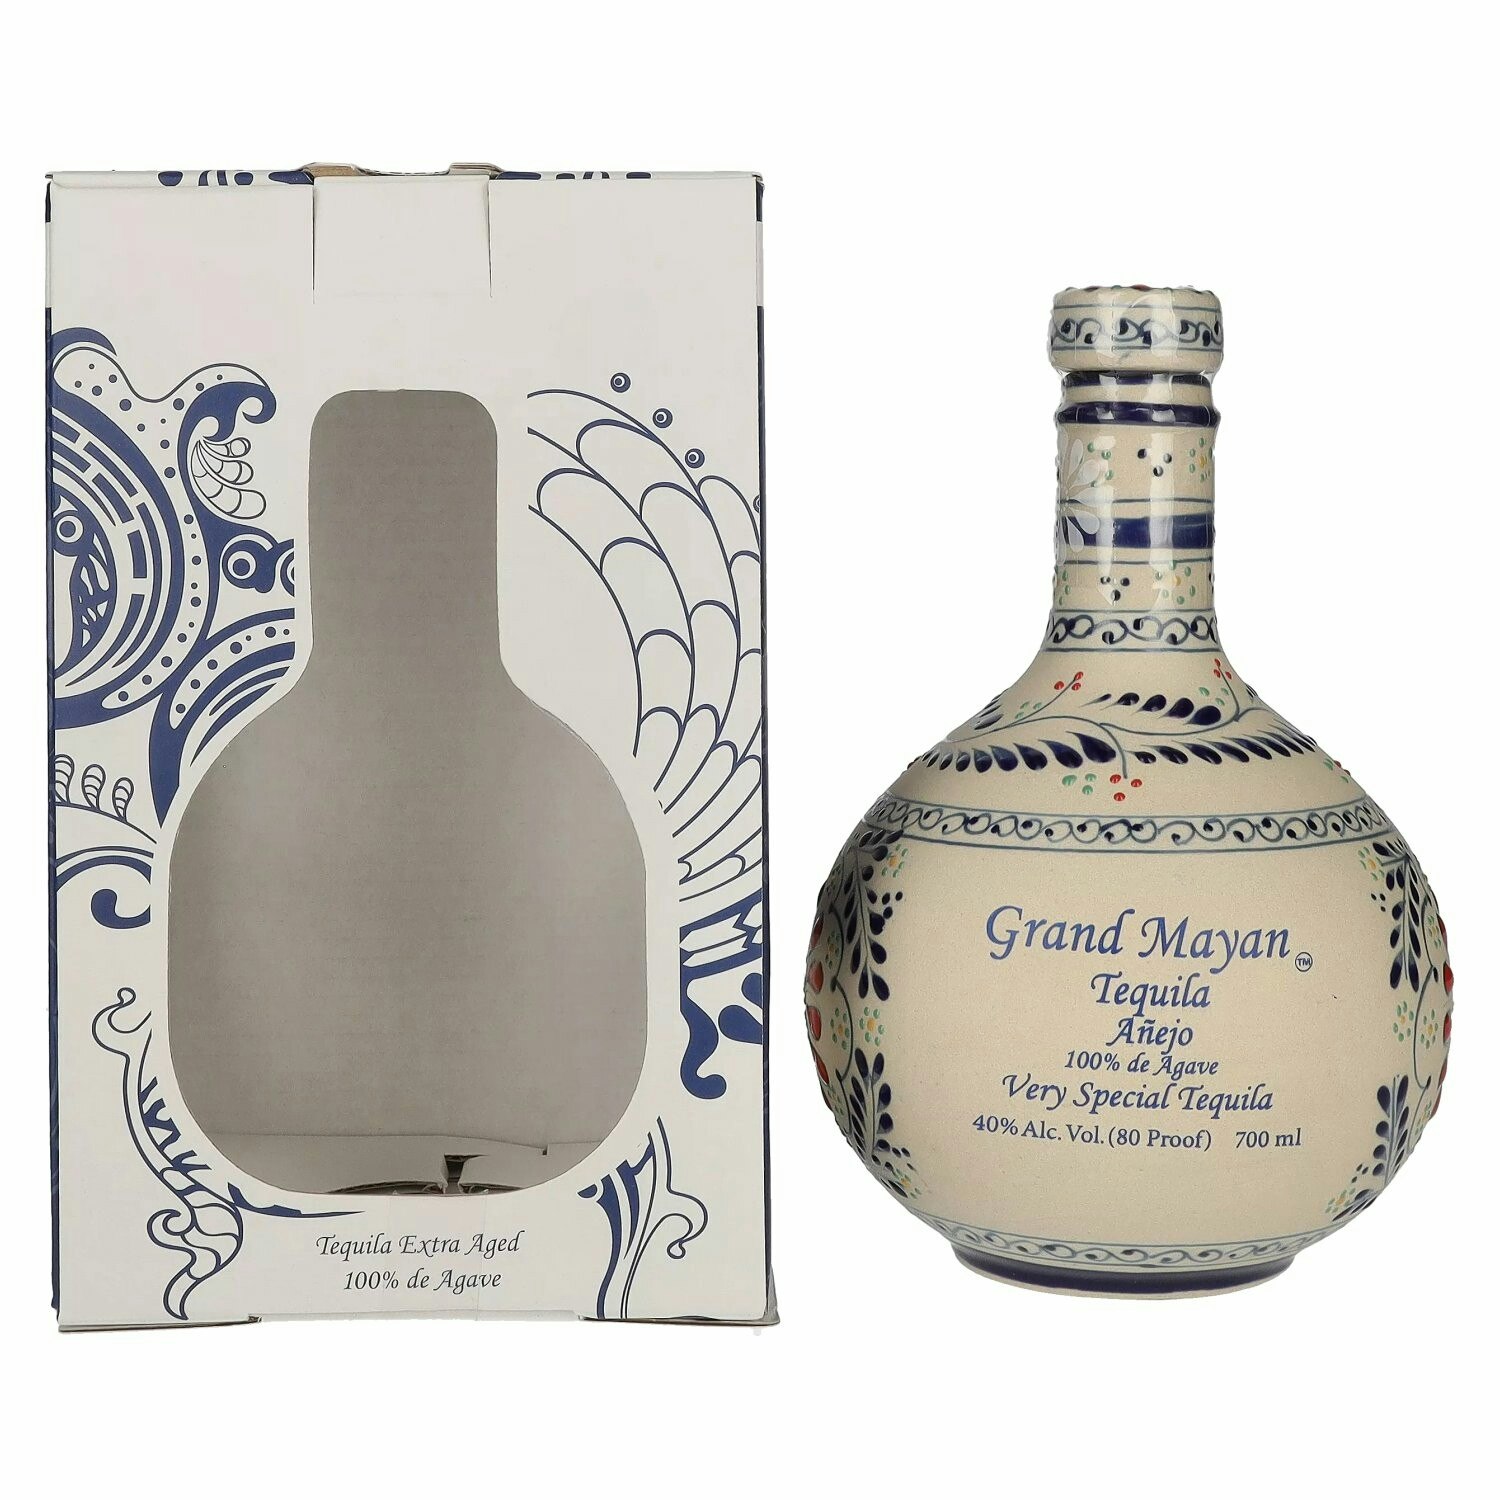 Grand Mayan EXTRA AGED Añejo Tequila 100% de Agave 40% Vol. 0,7l in Giftbox